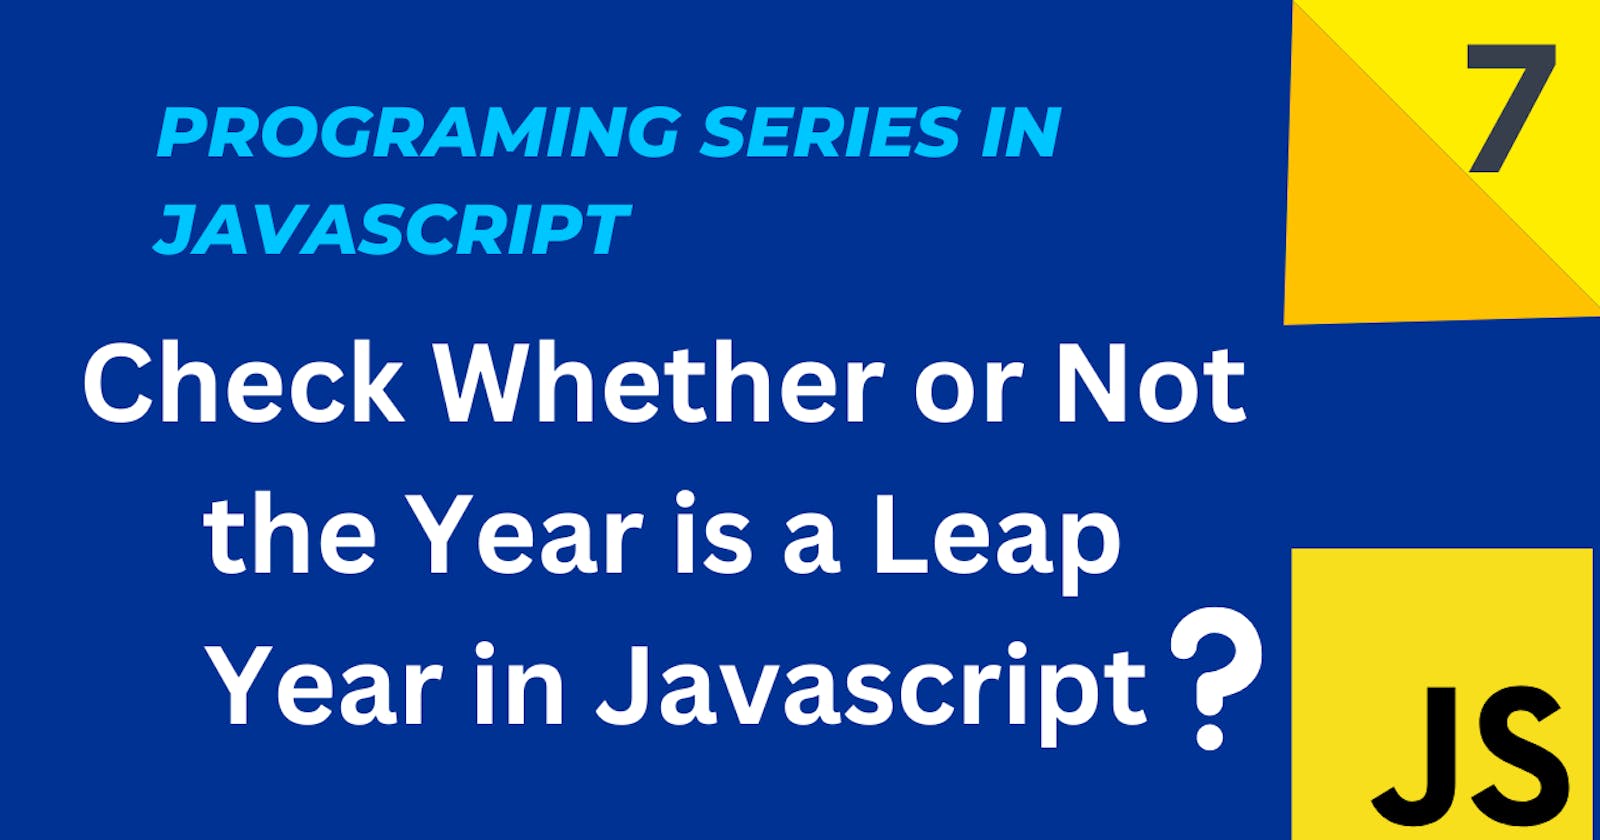 Check Whether or Not the Year is a Leap Year in Javascript?